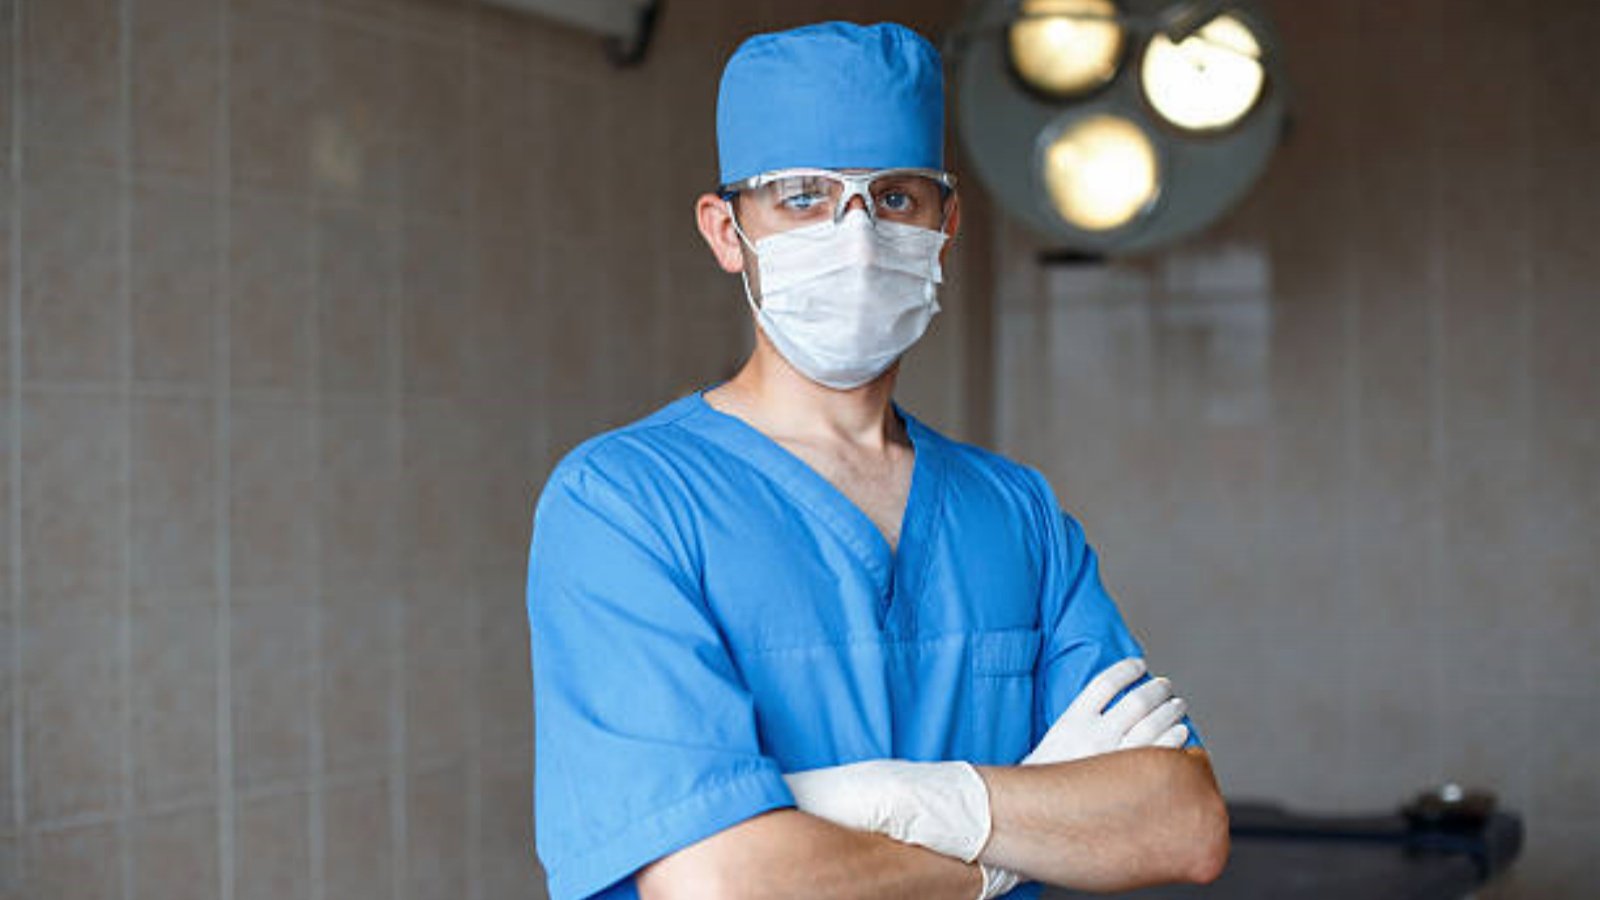 Surgery Fluid-Resistant Surgical Gowns: The Ultimate Protection in the Operating Room